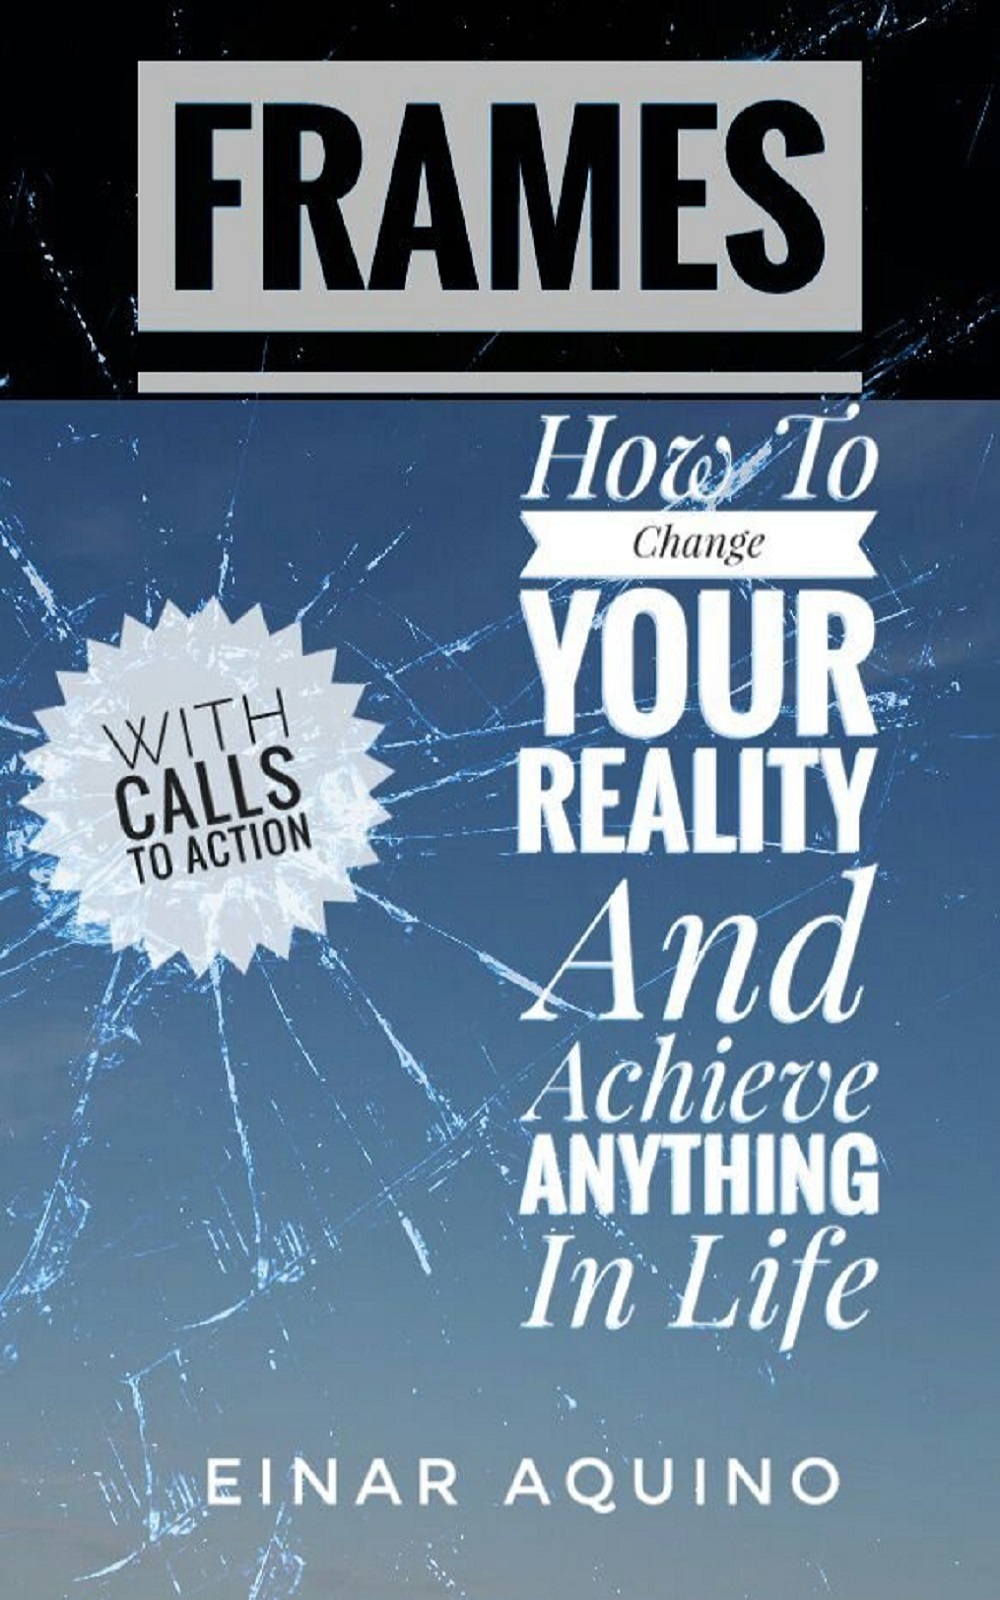 FREE: FRAMES: How To Change Your Reality And Achieve Anything In Life by Einar Aquino